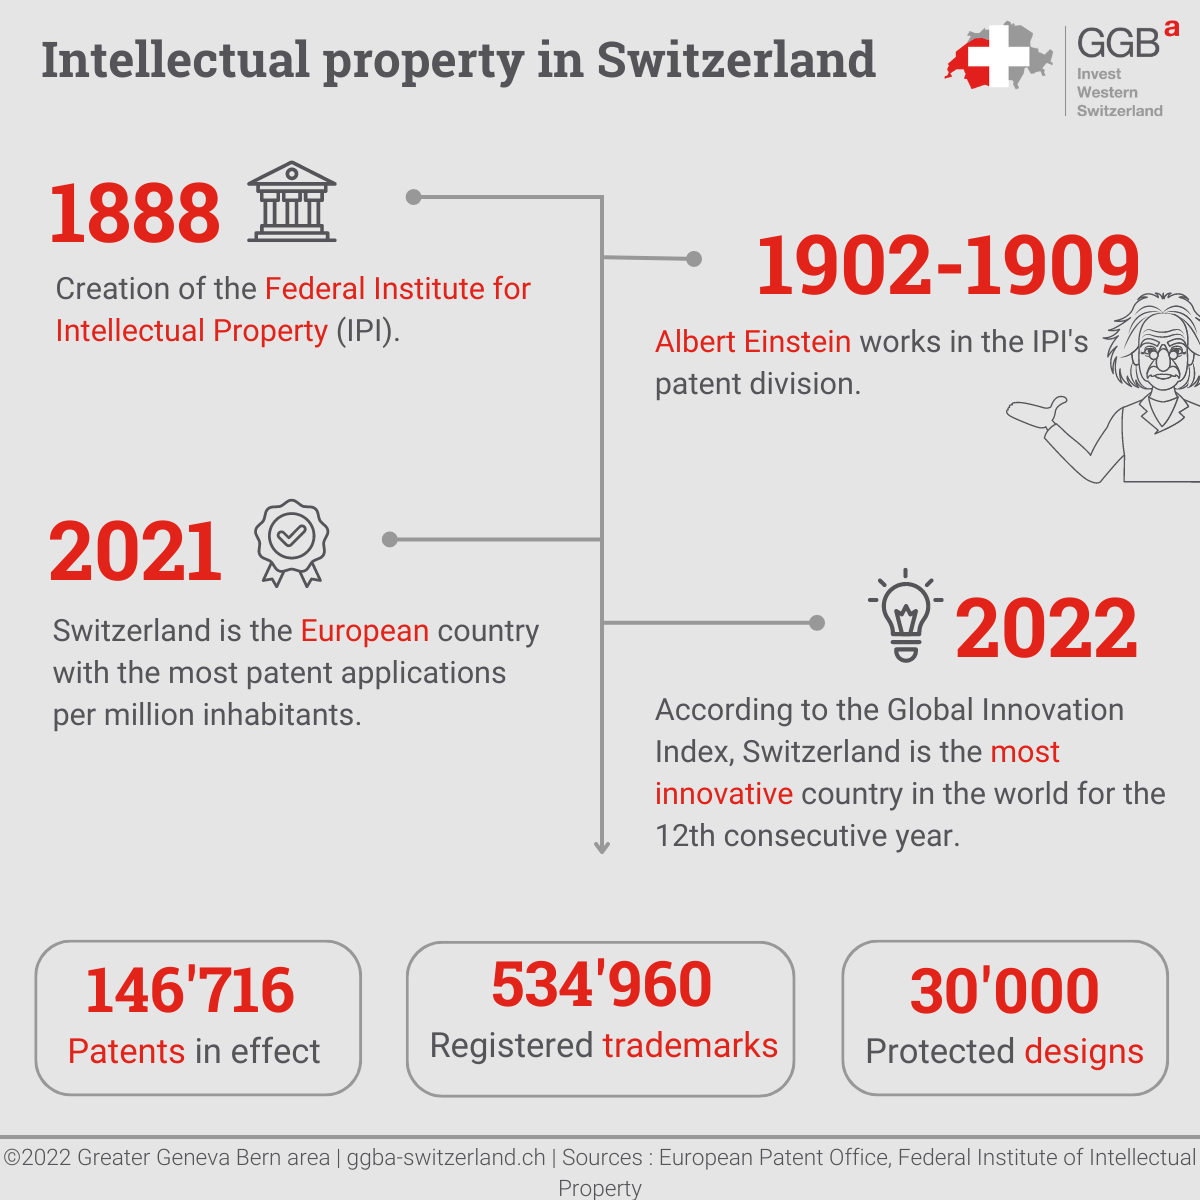 Switzerland being the most innovative country in the world, intellectual property proctection is a central issue for the Swiss authorities,